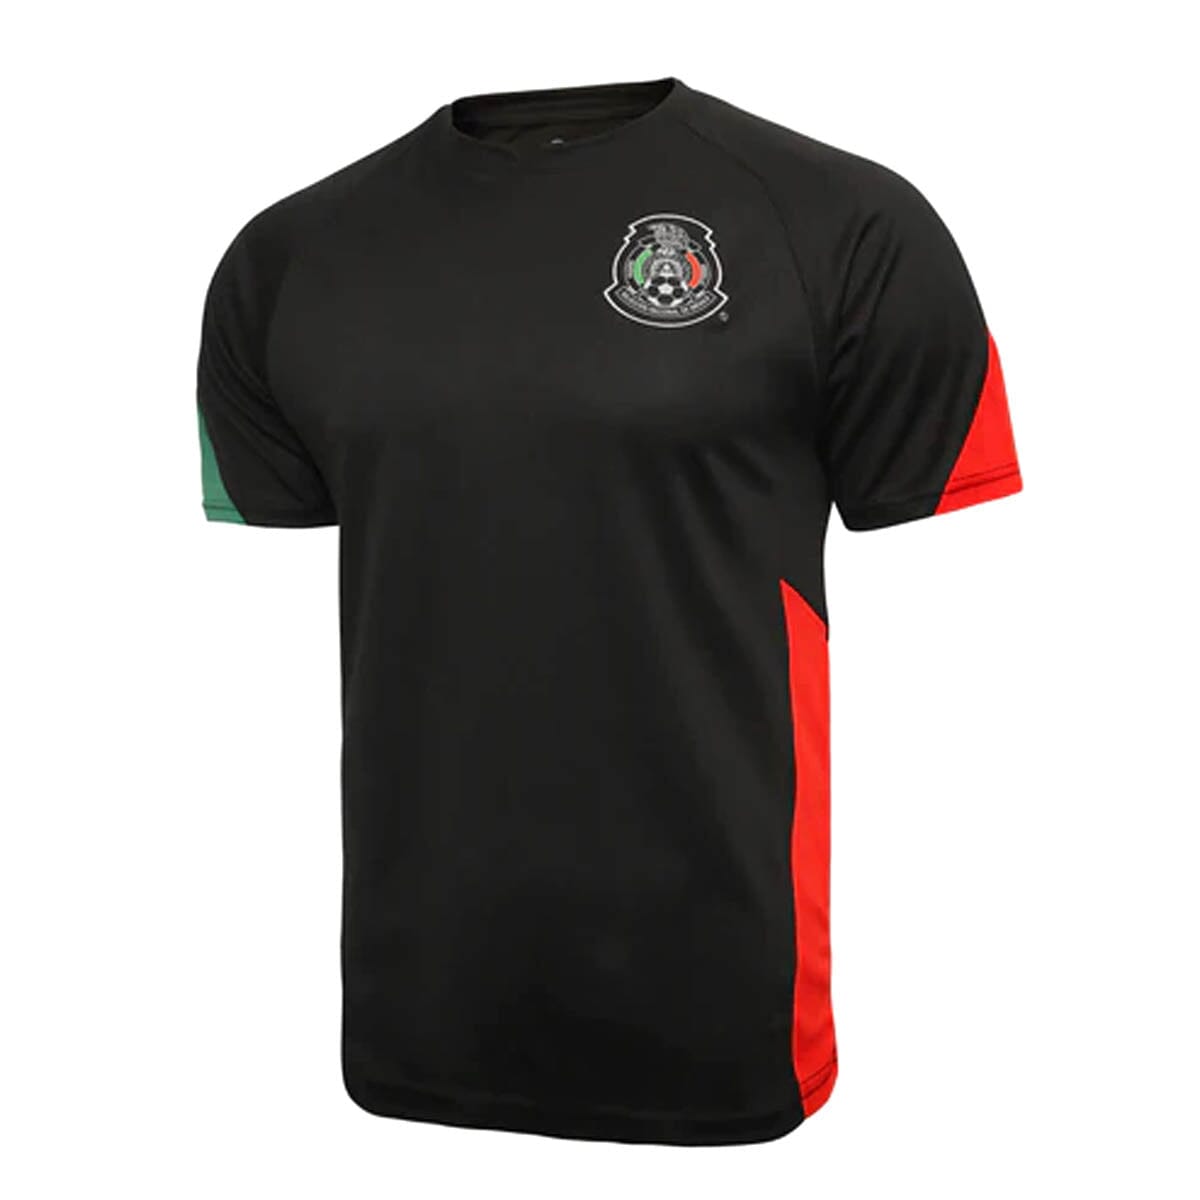 Icon Sport Mexico National Soccer Team Adult Striker Game Day Shirt | FMF72PF-K Apparel Icon Sports Group Adult Small Black 